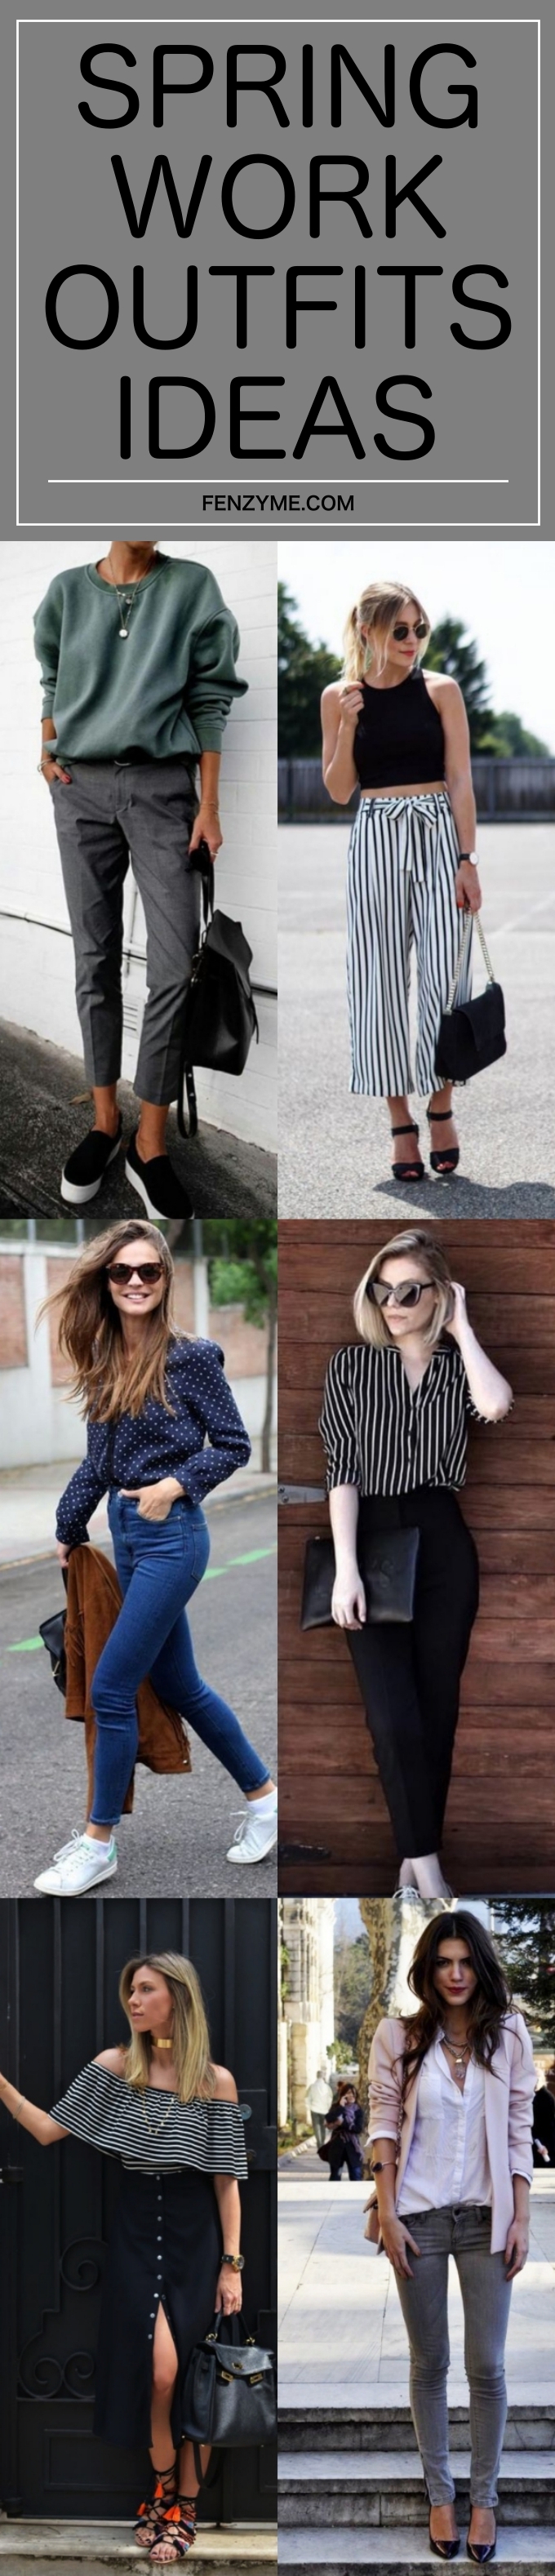 Spring Work Outfits Ideas